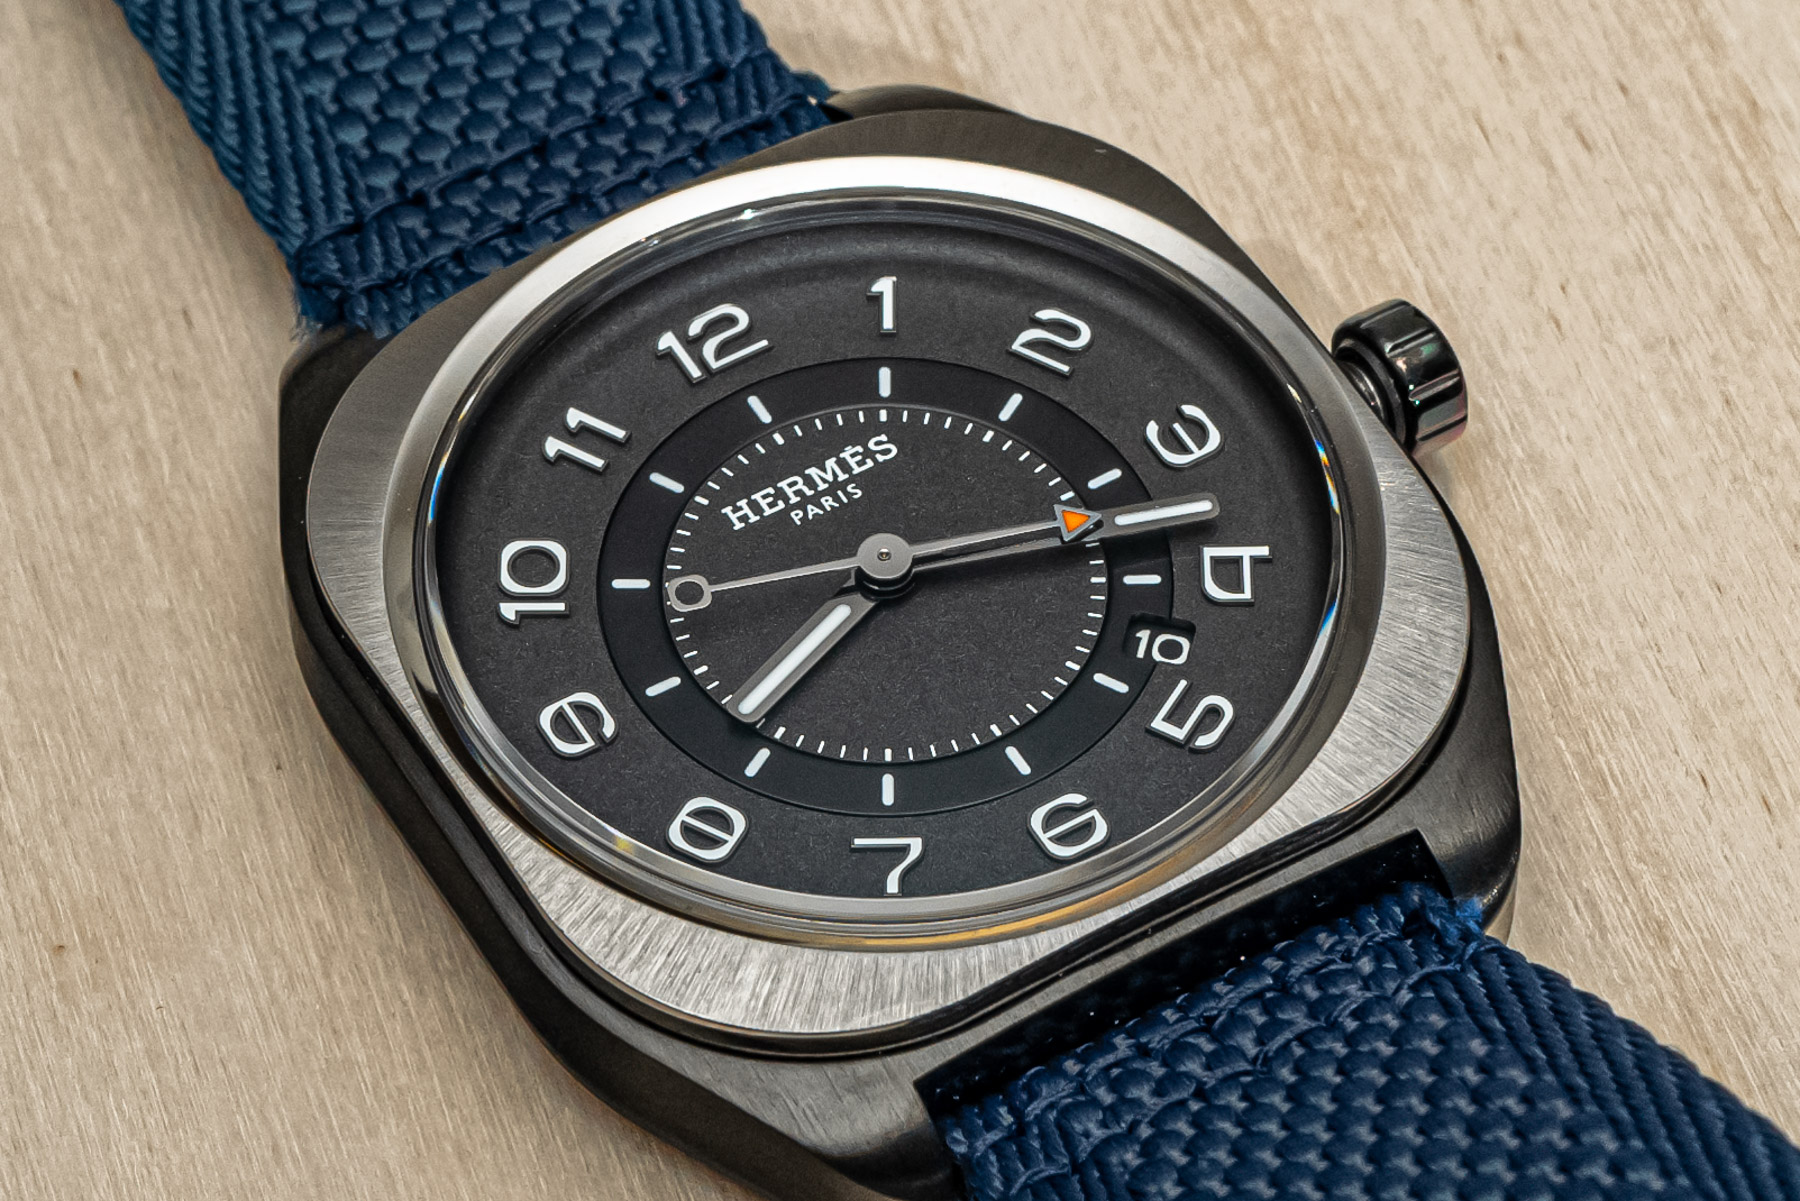 Hands-On With The Two-Tone Black & Gold Hermès H08 Watch